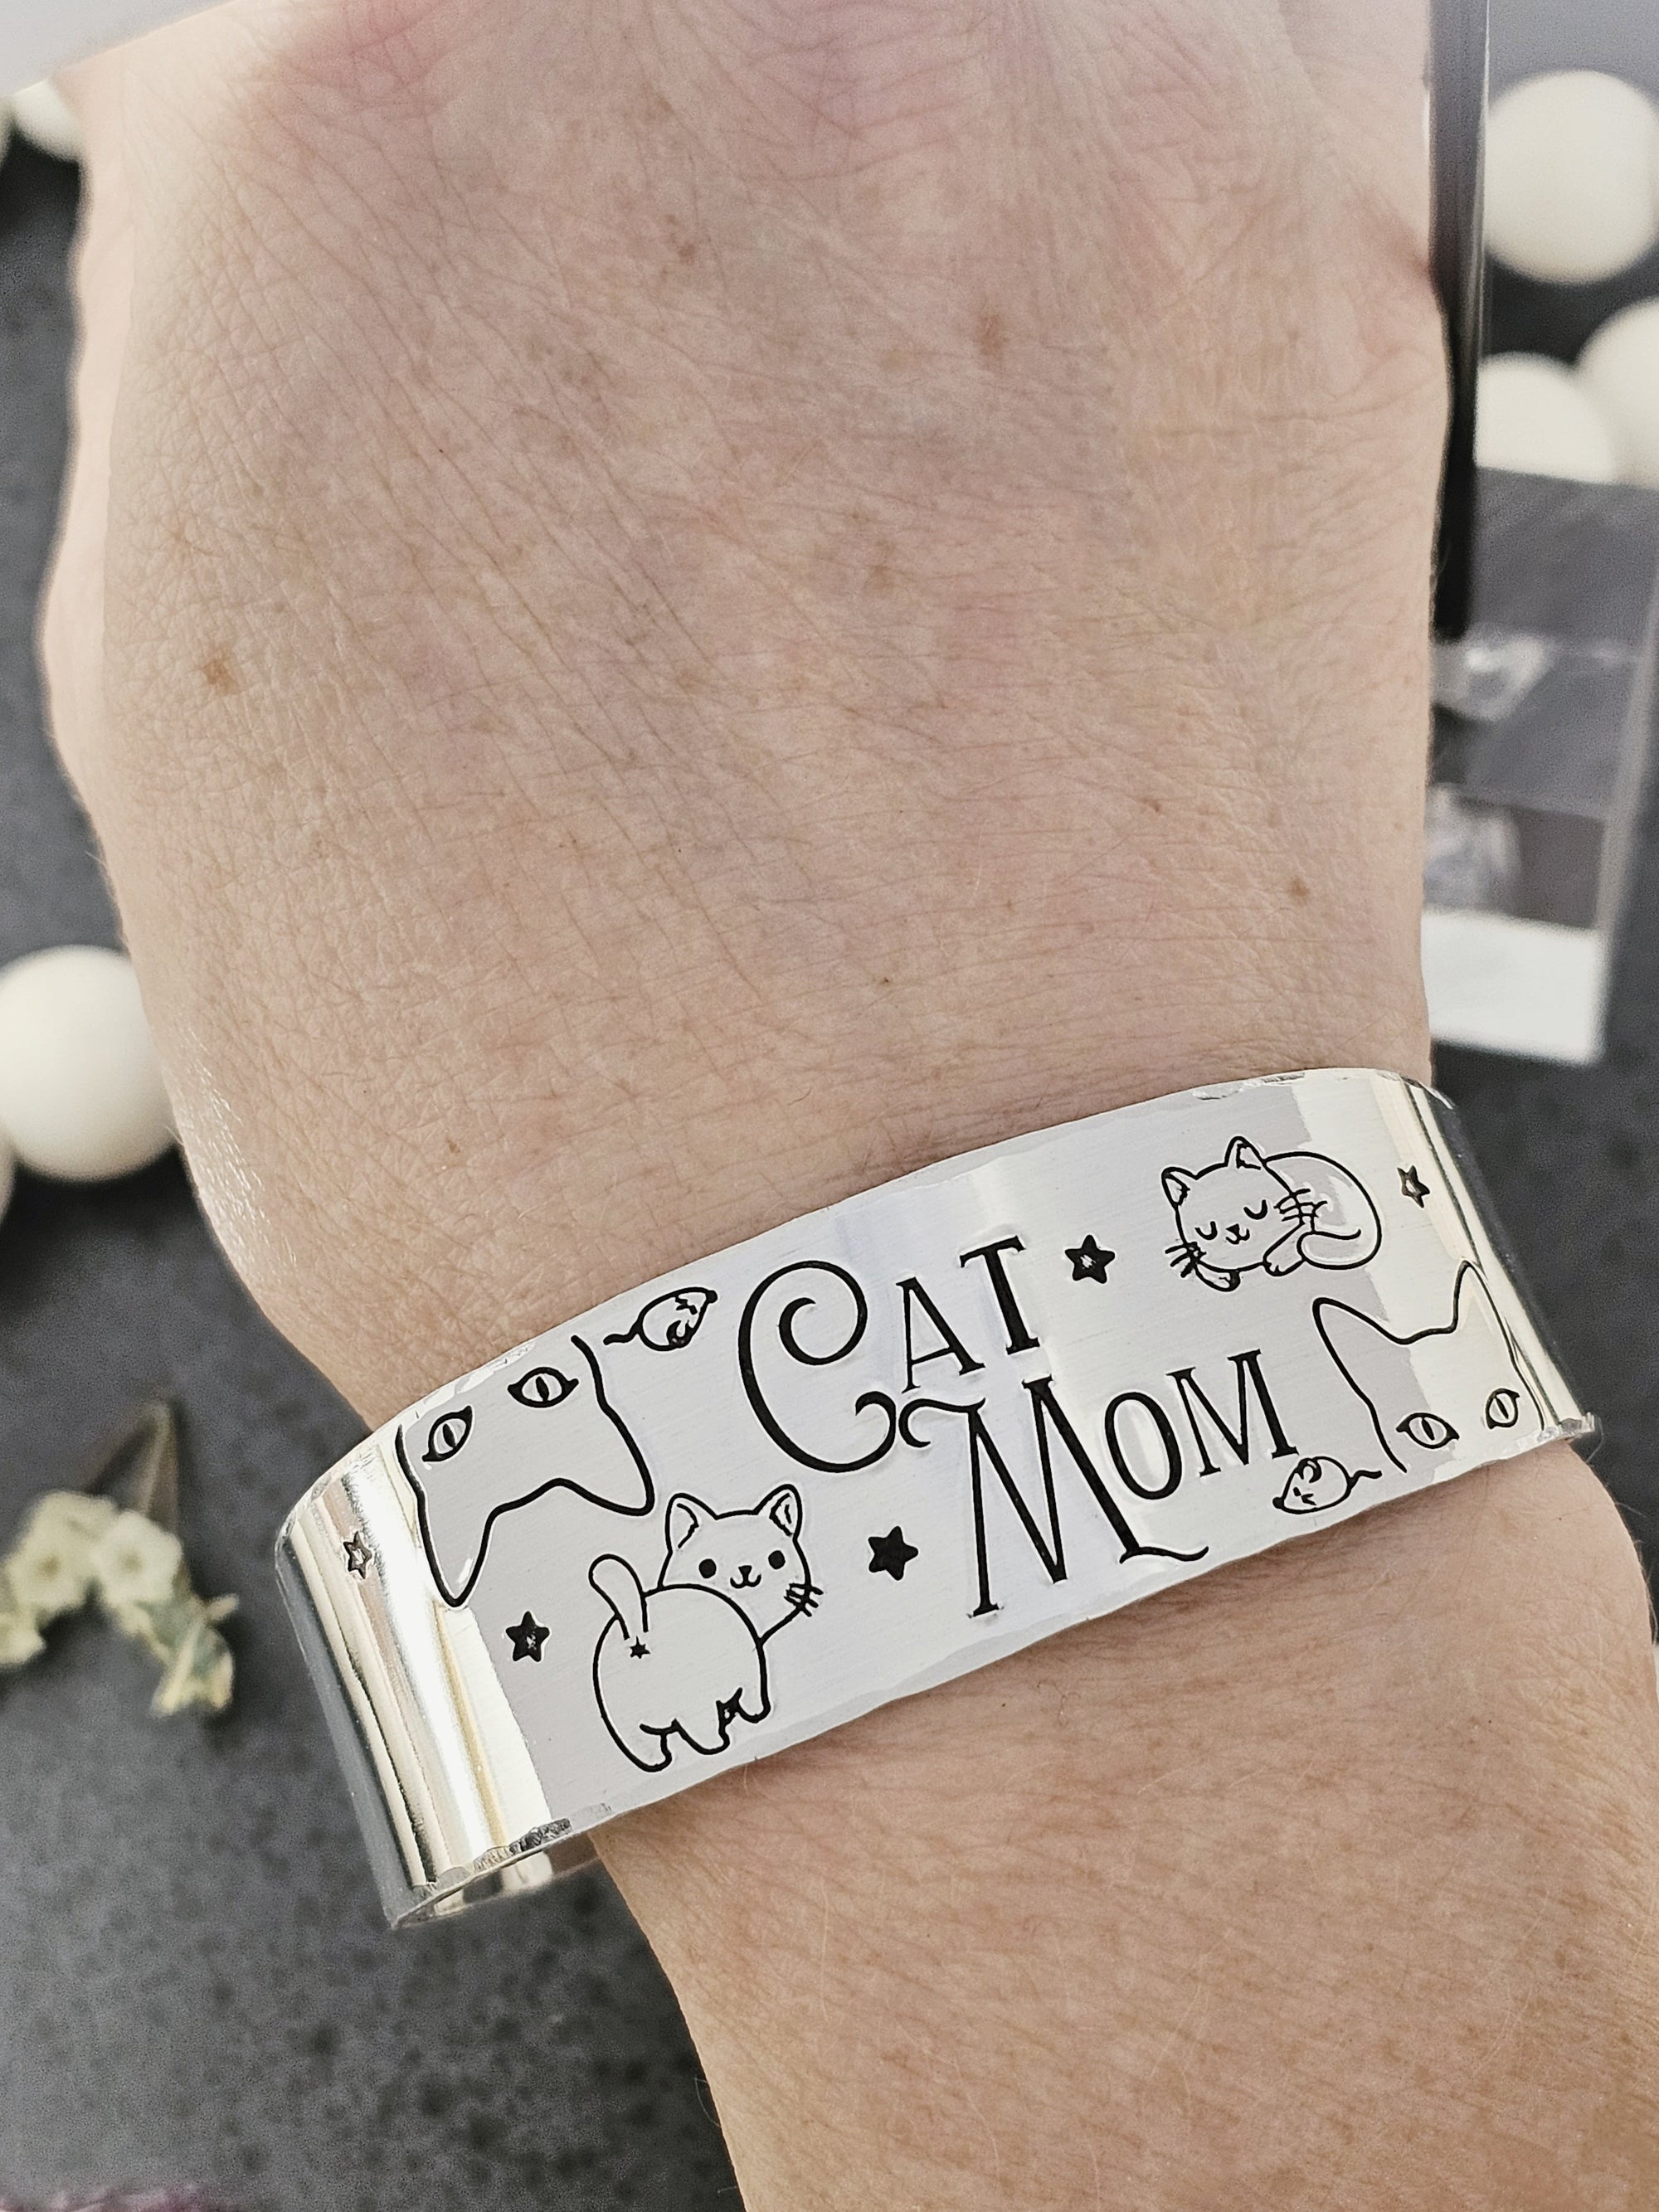 Cat Mom Bracelet Cuff, Crazy Cat Lady, Cat Lover Jewelry, Cat Rescue, Kitty Tag, Cat Name Tag, Thick Bracelet Cuff